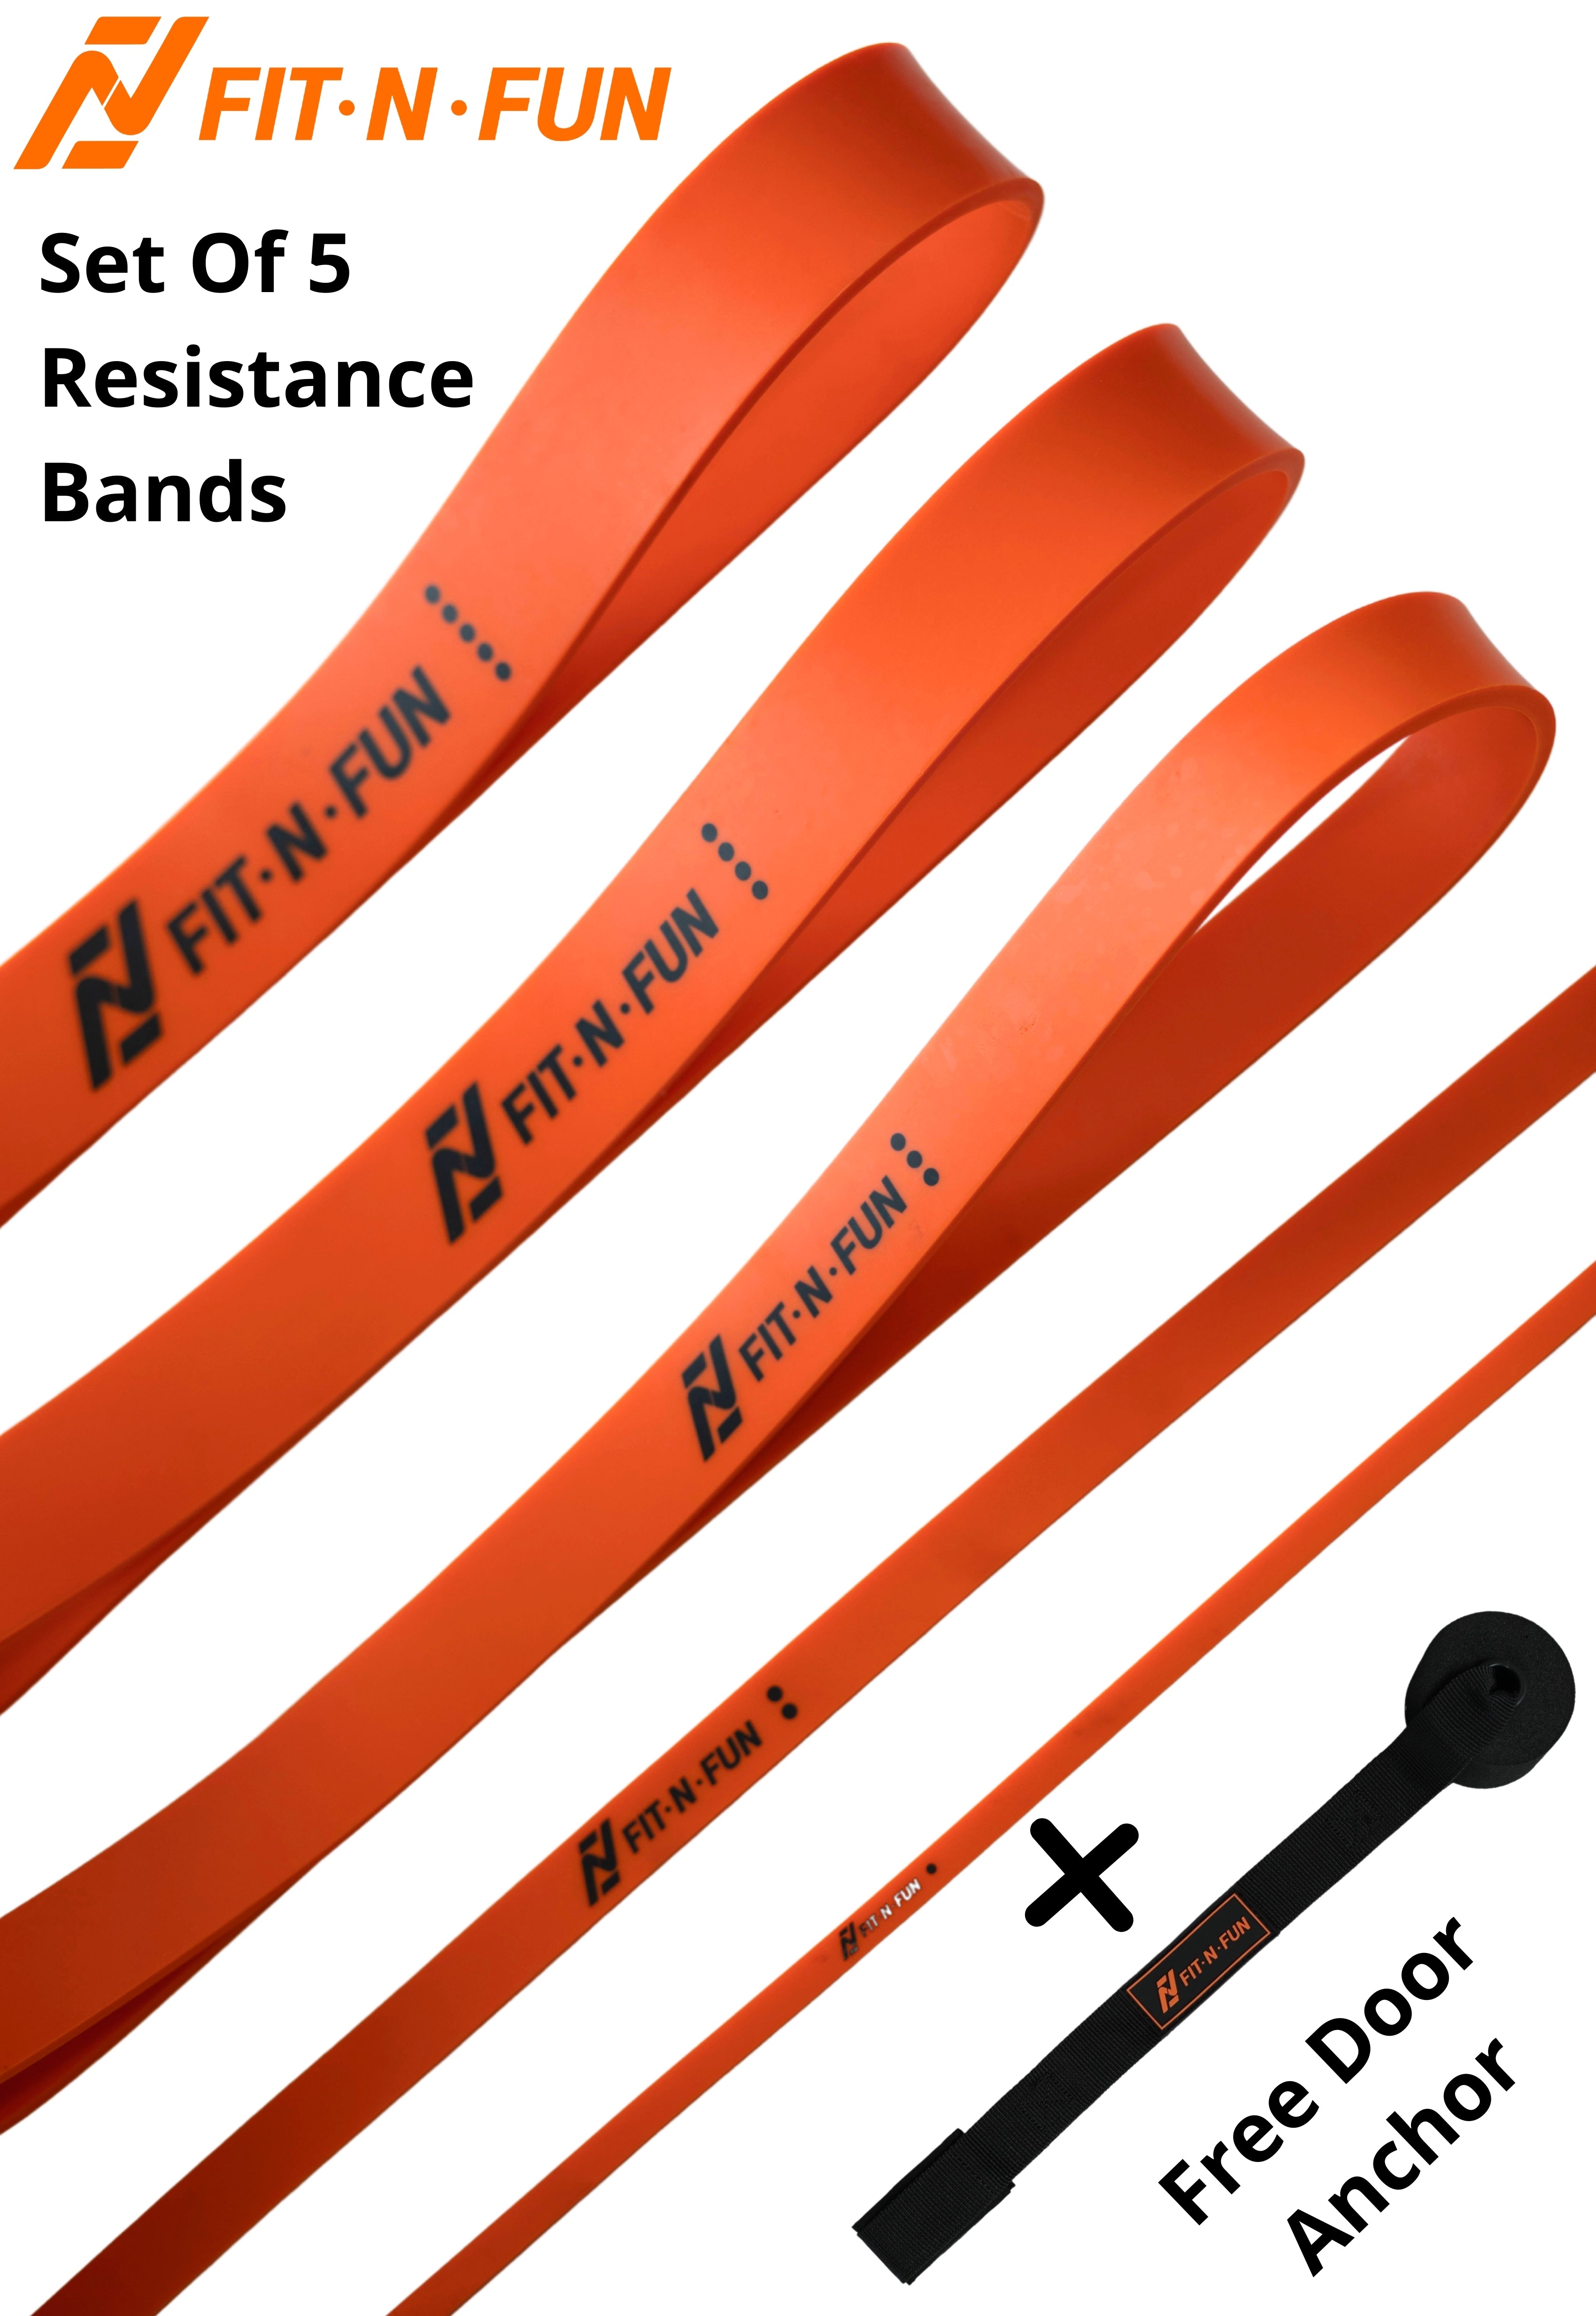 Fit-N-Fun Home Workout Resistance Bands Set of 5 With Free Door Anchor